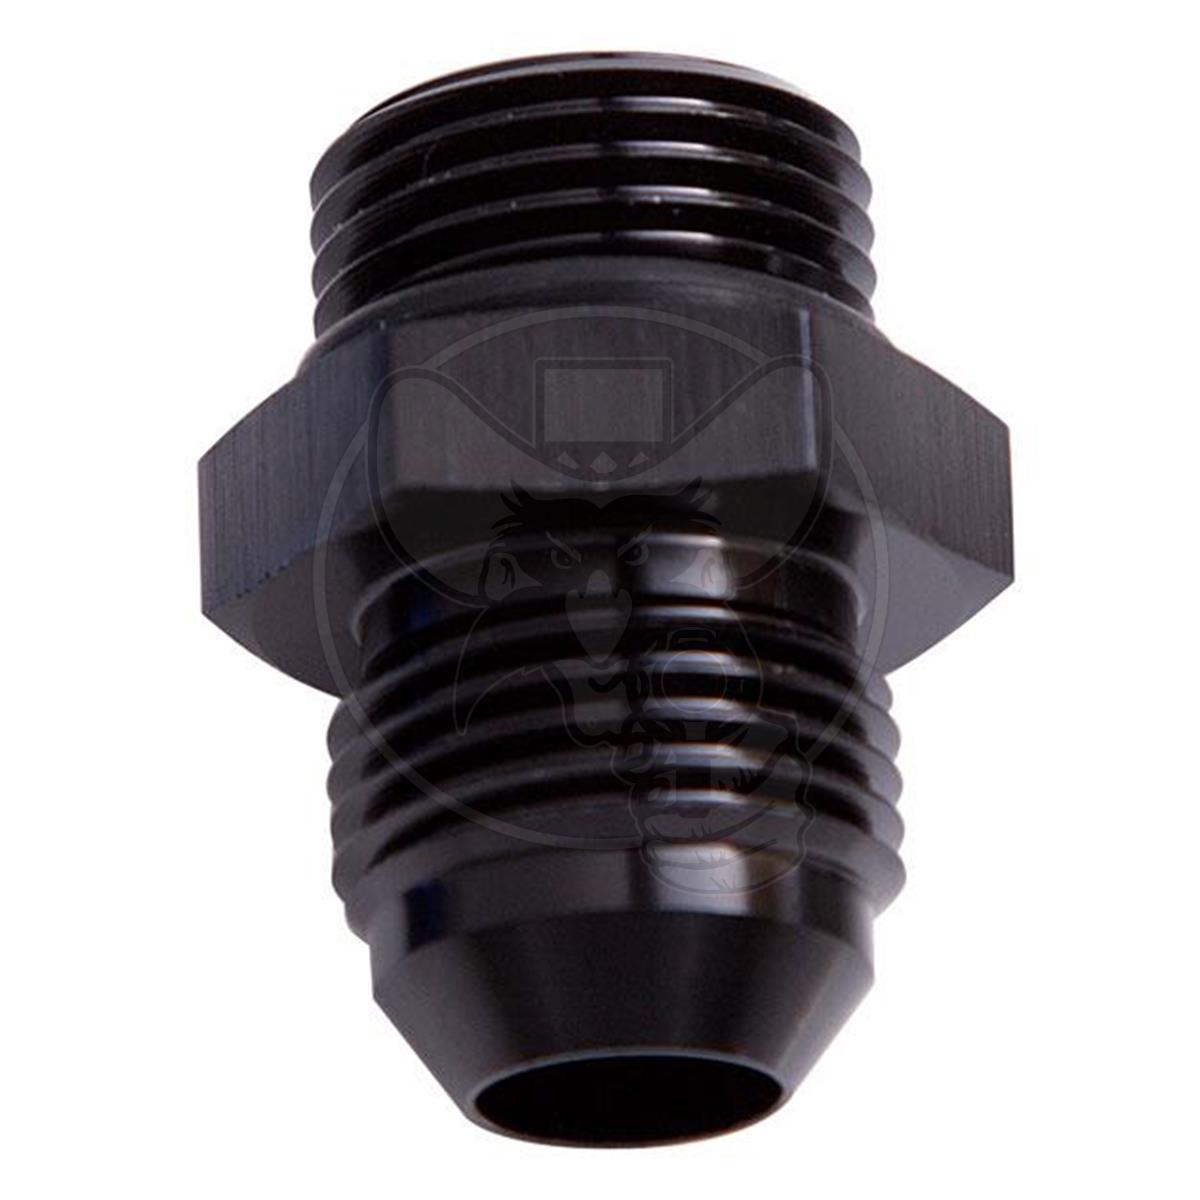 Aeroflow -10 ORB to -10AN Straight Male Flare Adapter - Black